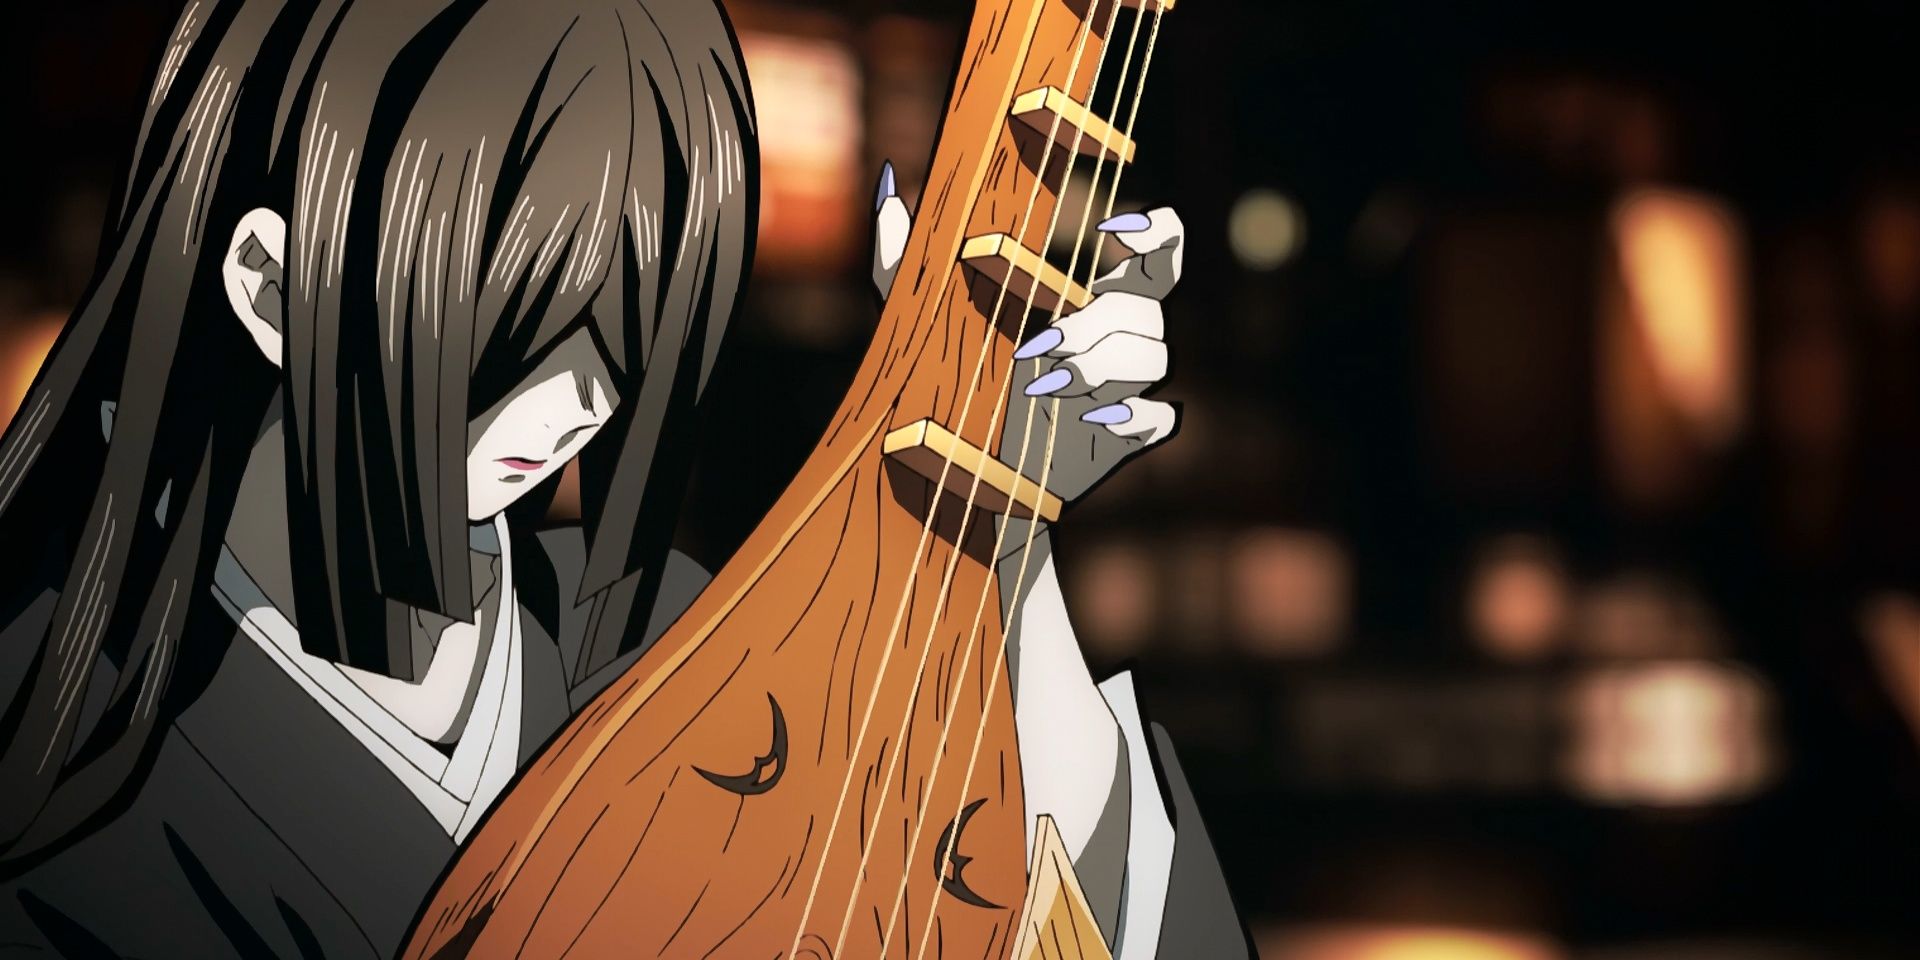 Nakime plays her Biwa while summoning the Lower Moons to the Infinity Castle in Demon Slayer